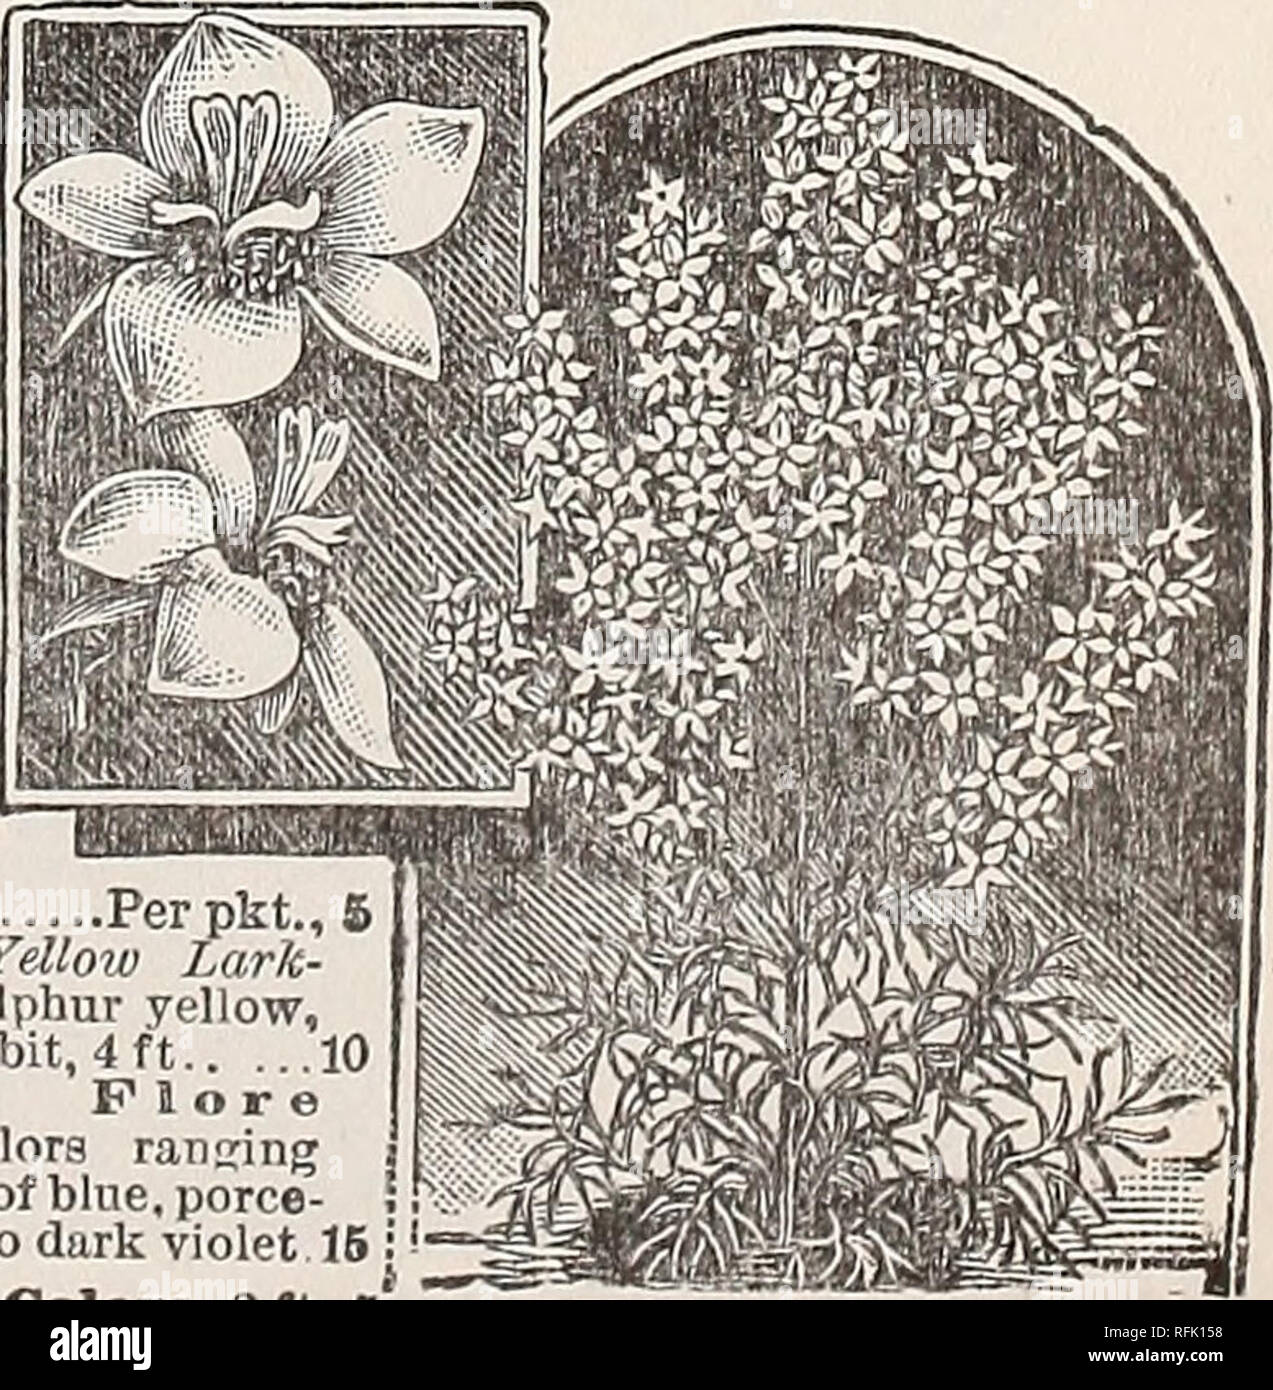 . Vegetable, flower &amp; agricultural seeds : spring 1899. Nursery stock New York (State) New York Catalogs; Vegetables Seeds Catalogs; Flowers Seeds Catalogs; Gardening Equipment and supplies Catalogs. SINGLE DAHLIAS. DELPHINIUM—Perennial Larkspur. Magnificent border plants with gorgeous spikes of bloom, vary- ing in shade from the most delicate wnite to the richest blue. If tht seed is sown early, they will flower the first season. H. P. Brunonianum (Musk-scented Larkspur). Flowers large, one to two inches across; light blue, shading t o purple with a black centre; they emit musky odor, 8 t Stock Photo